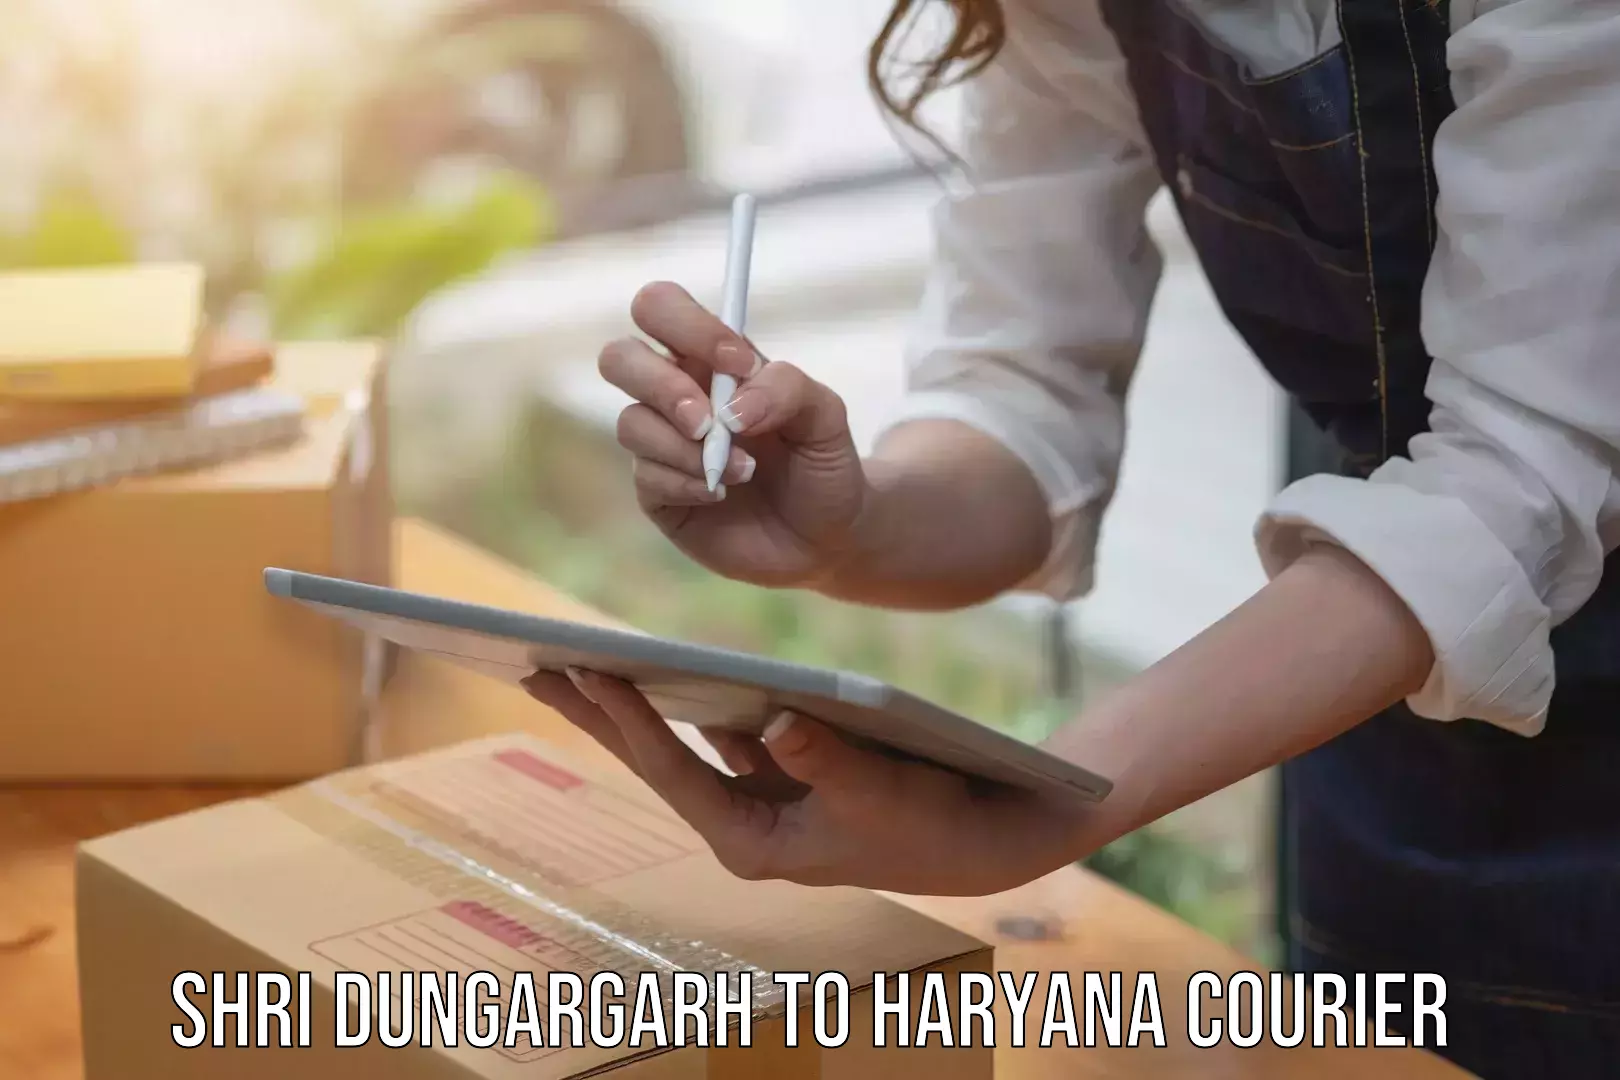 Nationwide delivery network Shri Dungargarh to Panchkula